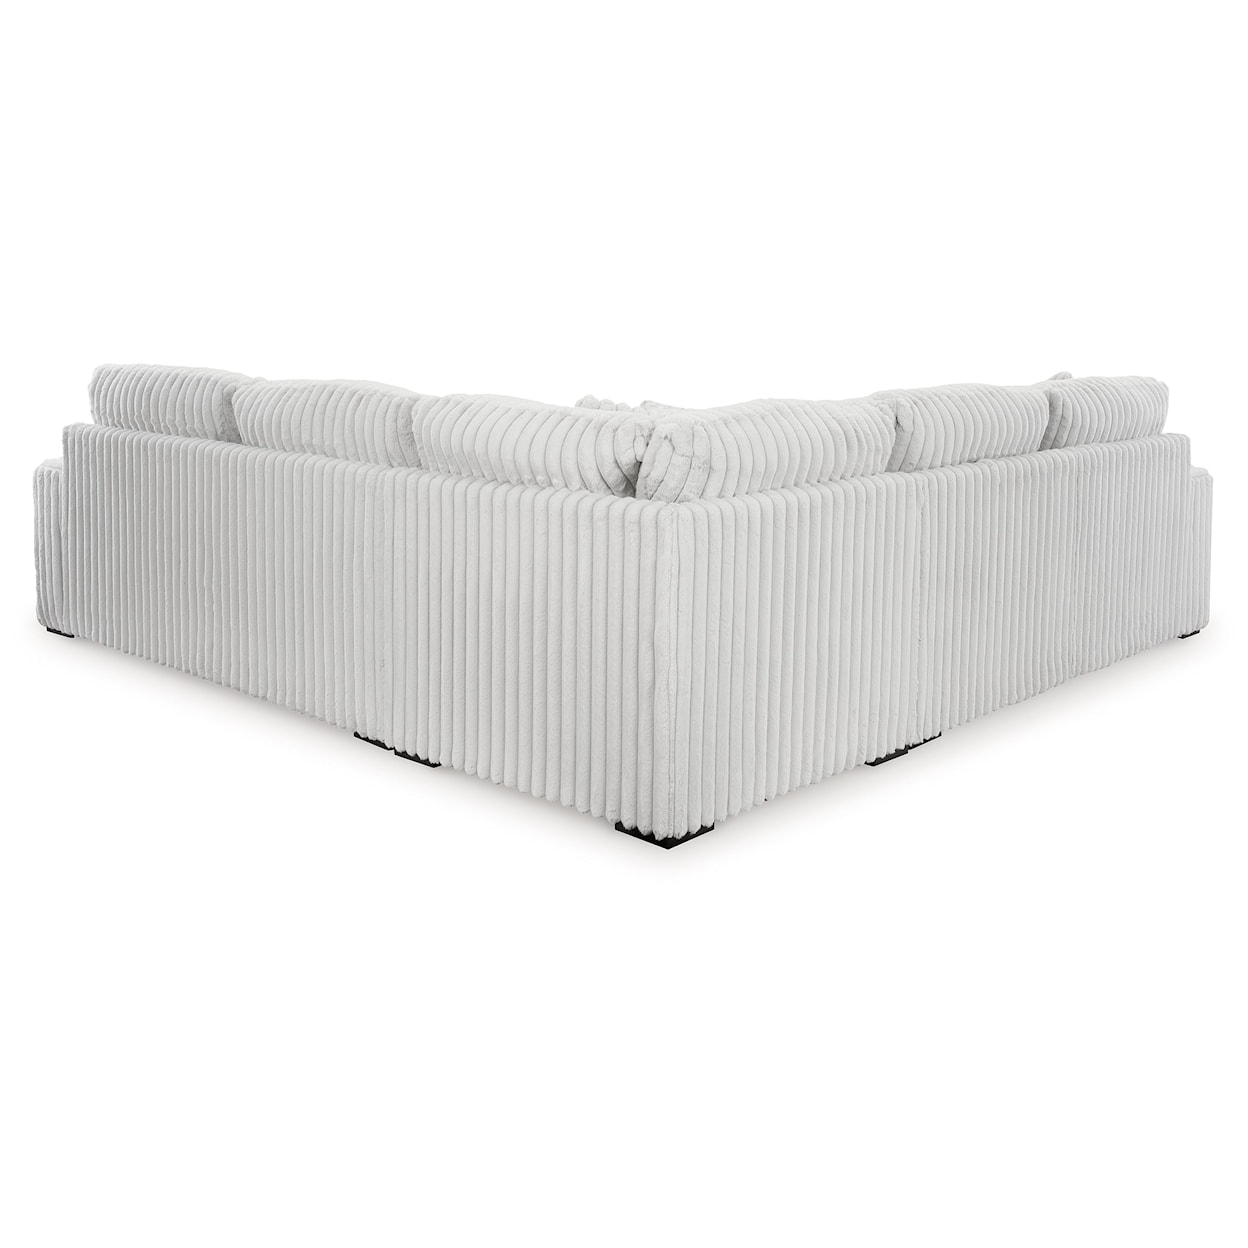 Benchcraft Stupendous 3-Piece Sectional